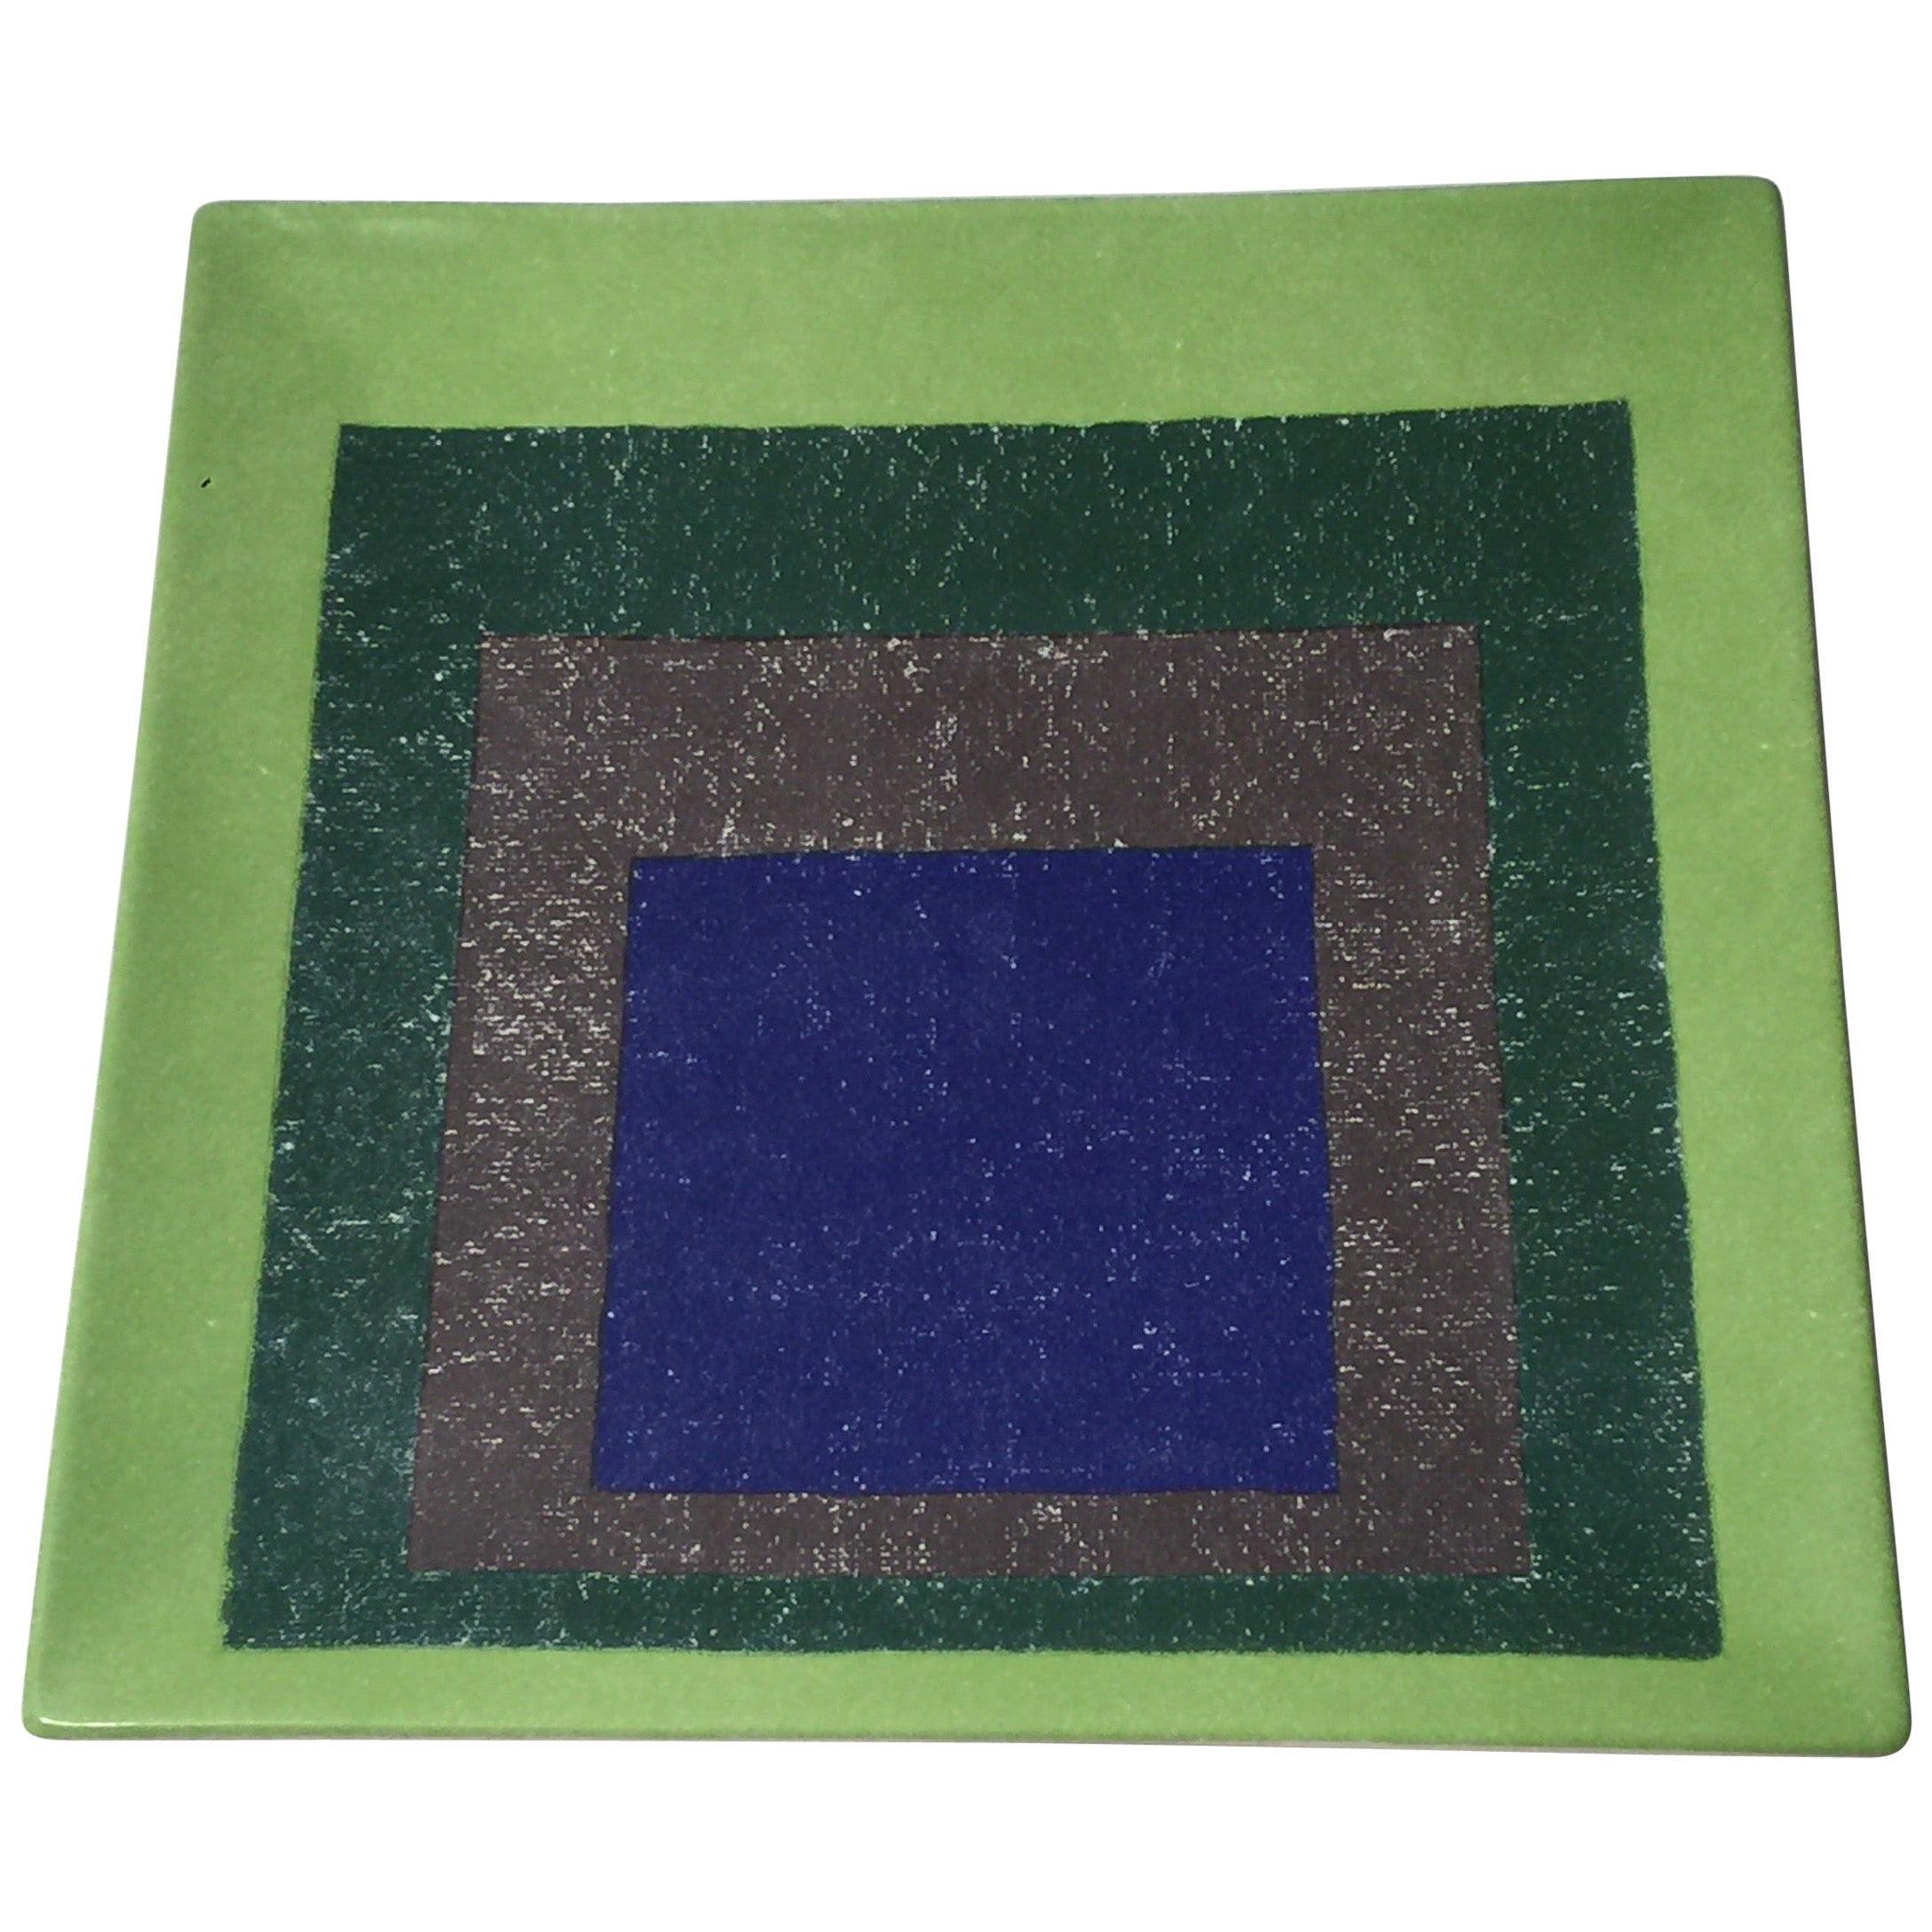 Joseph Albers "Study for Homage to the Square" Plate